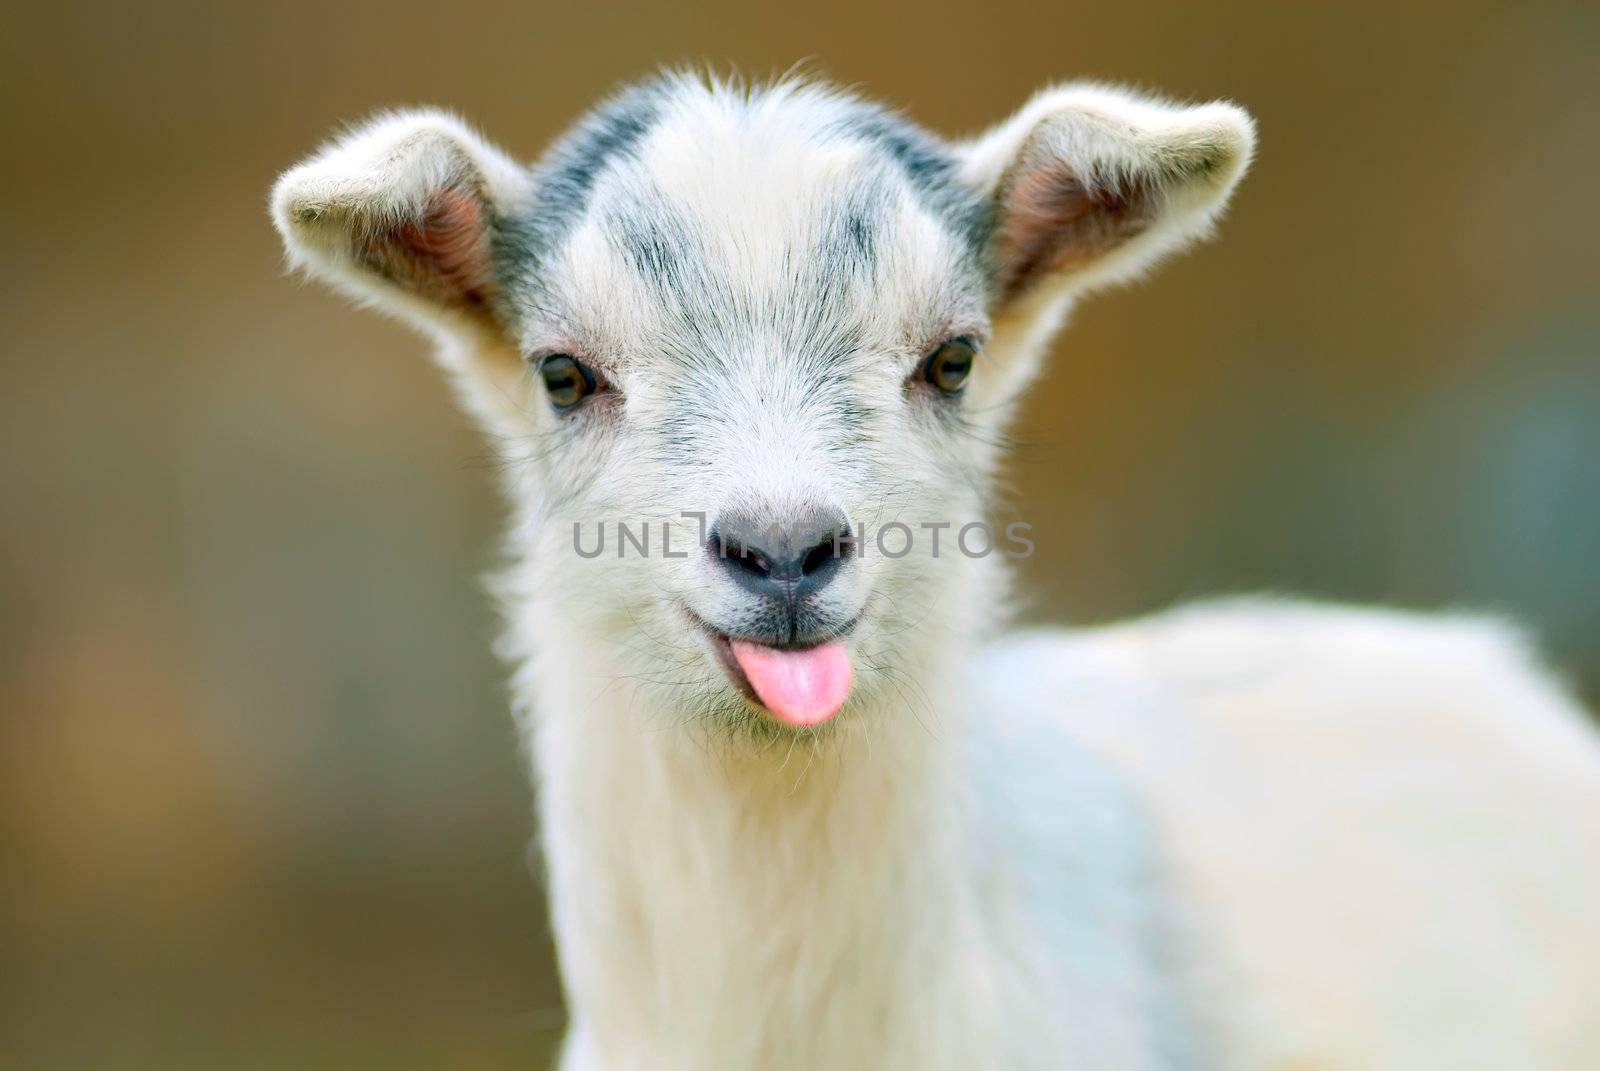 funny goat puts out its tongue by makspogonii